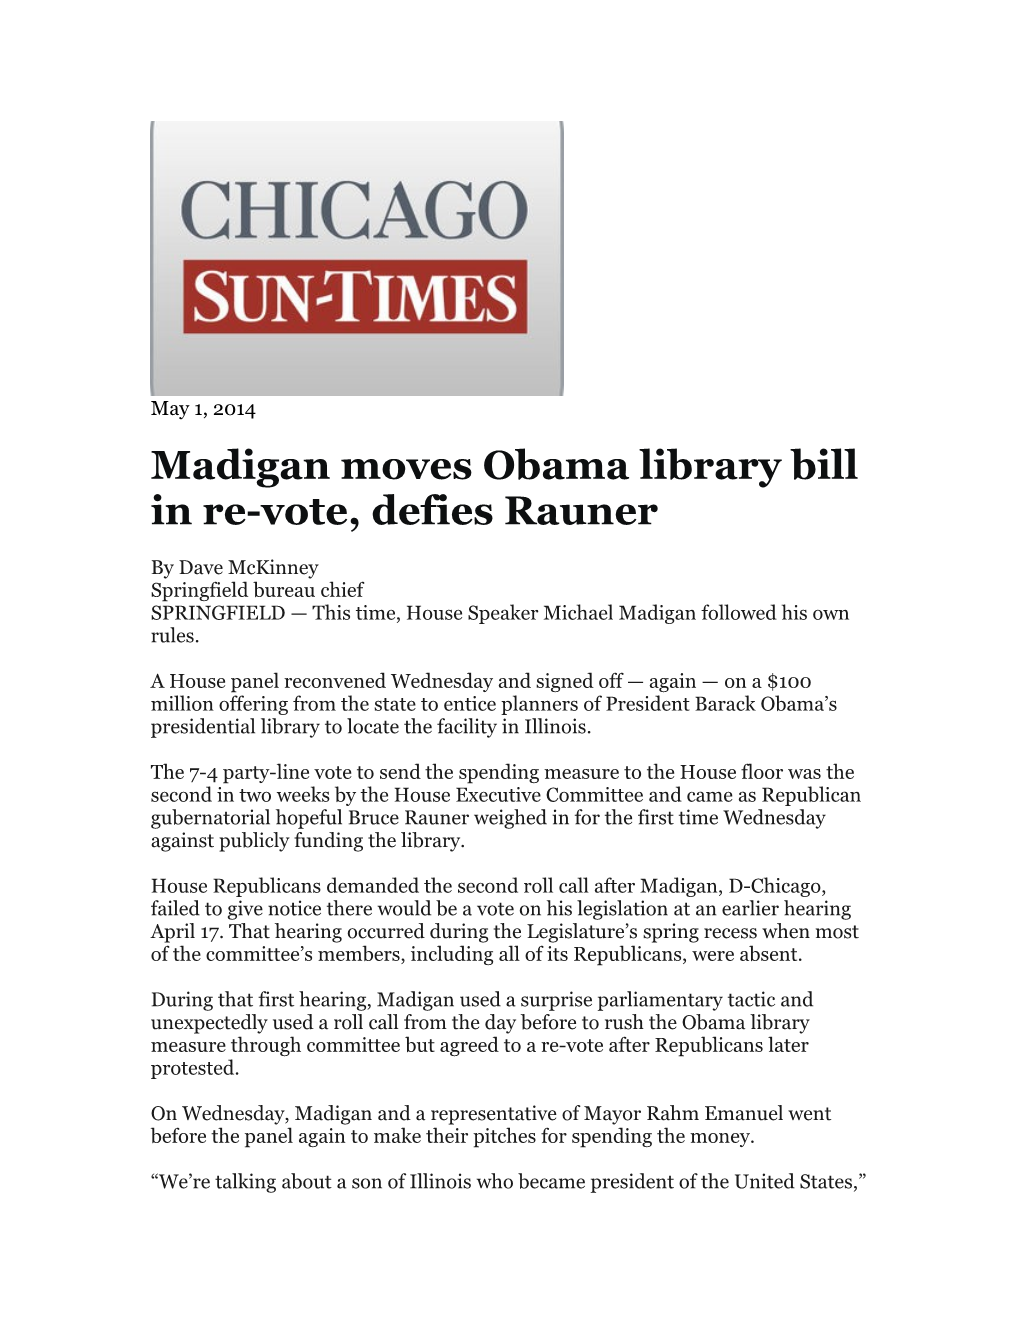 Madigan Moves Obama Library Bill in Re-Vote, Defies Rauner